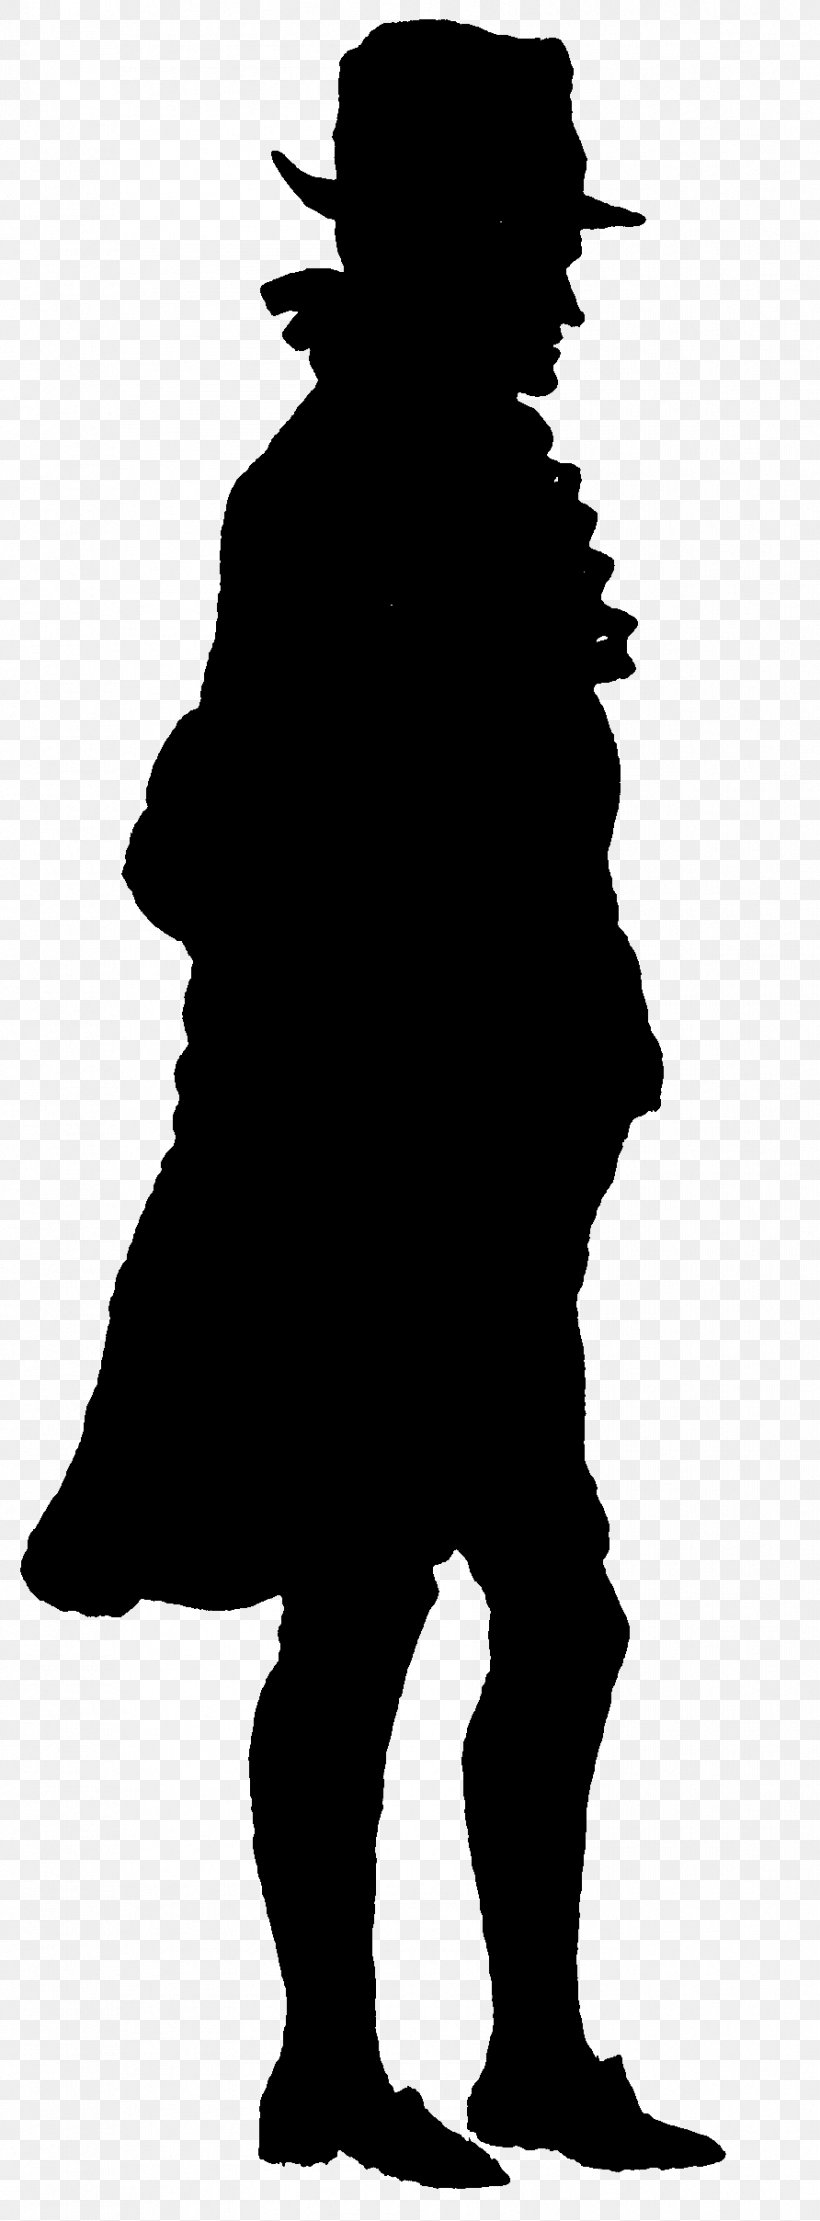 Silhouette Public Domain Clip Art, PNG, 892x2417px, Silhouette, Art, Black, Black And White, Fictional Character Download Free